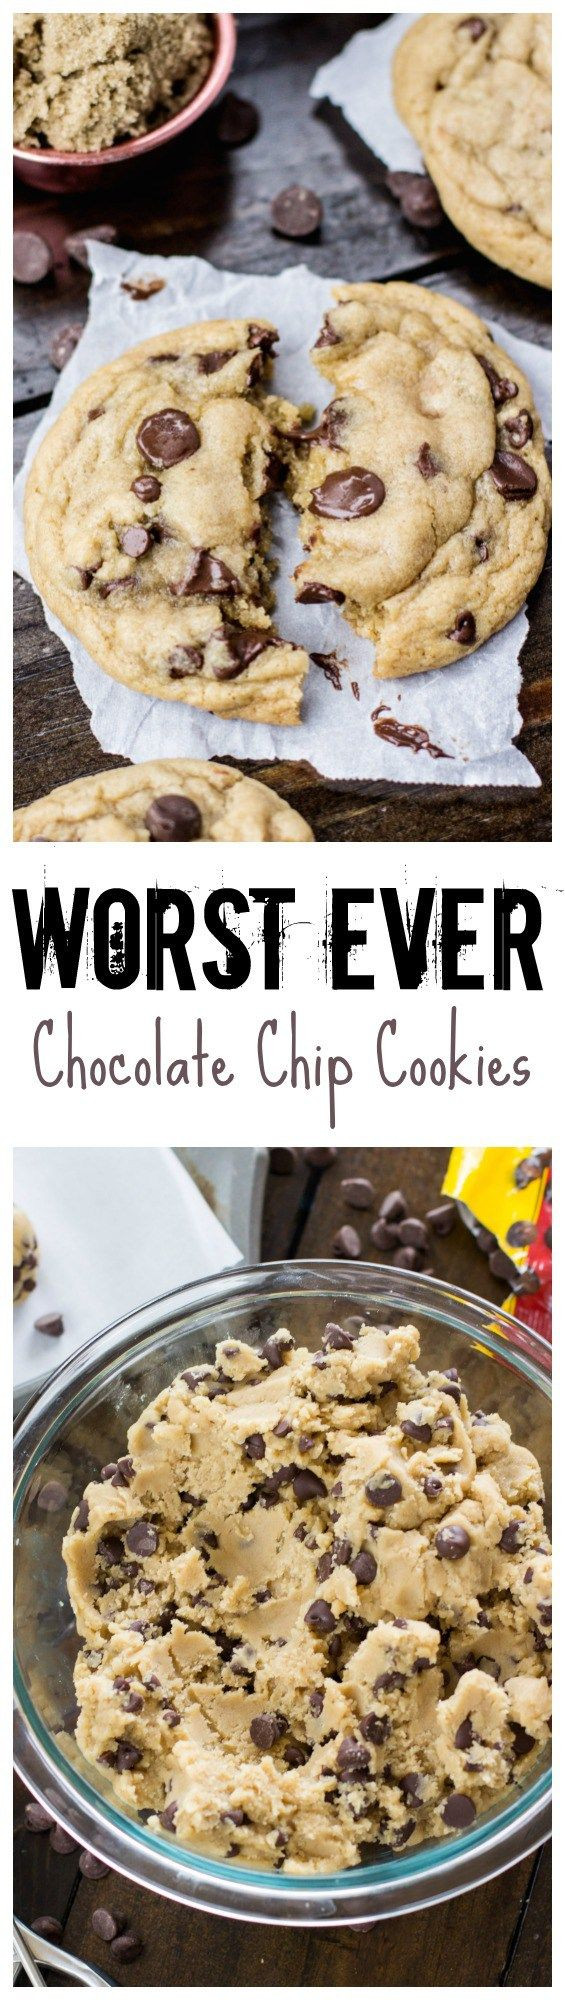 The Worst Chocolate Chip Cookies
 The WORST EVER Chocolate Chip Cookies Recipe